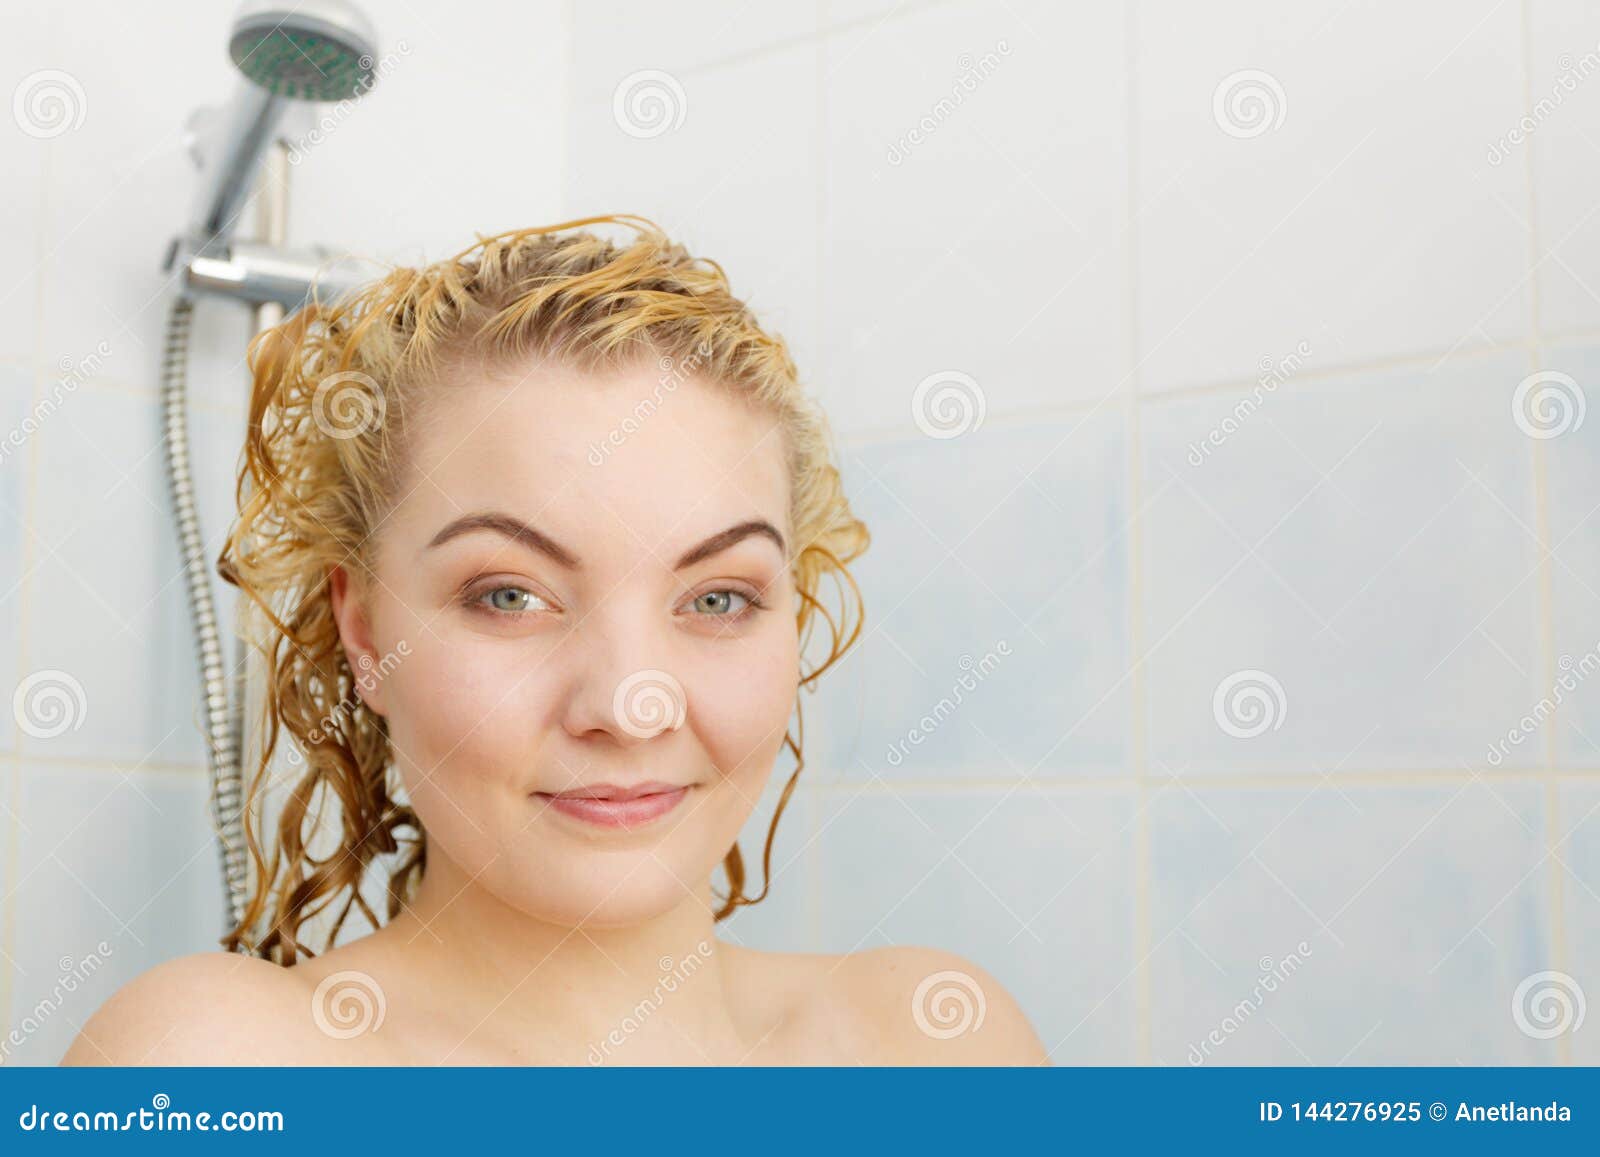 Woman Under Shower with Wet Blonde Hair Stock Image - Image of hair, happy:  144276925